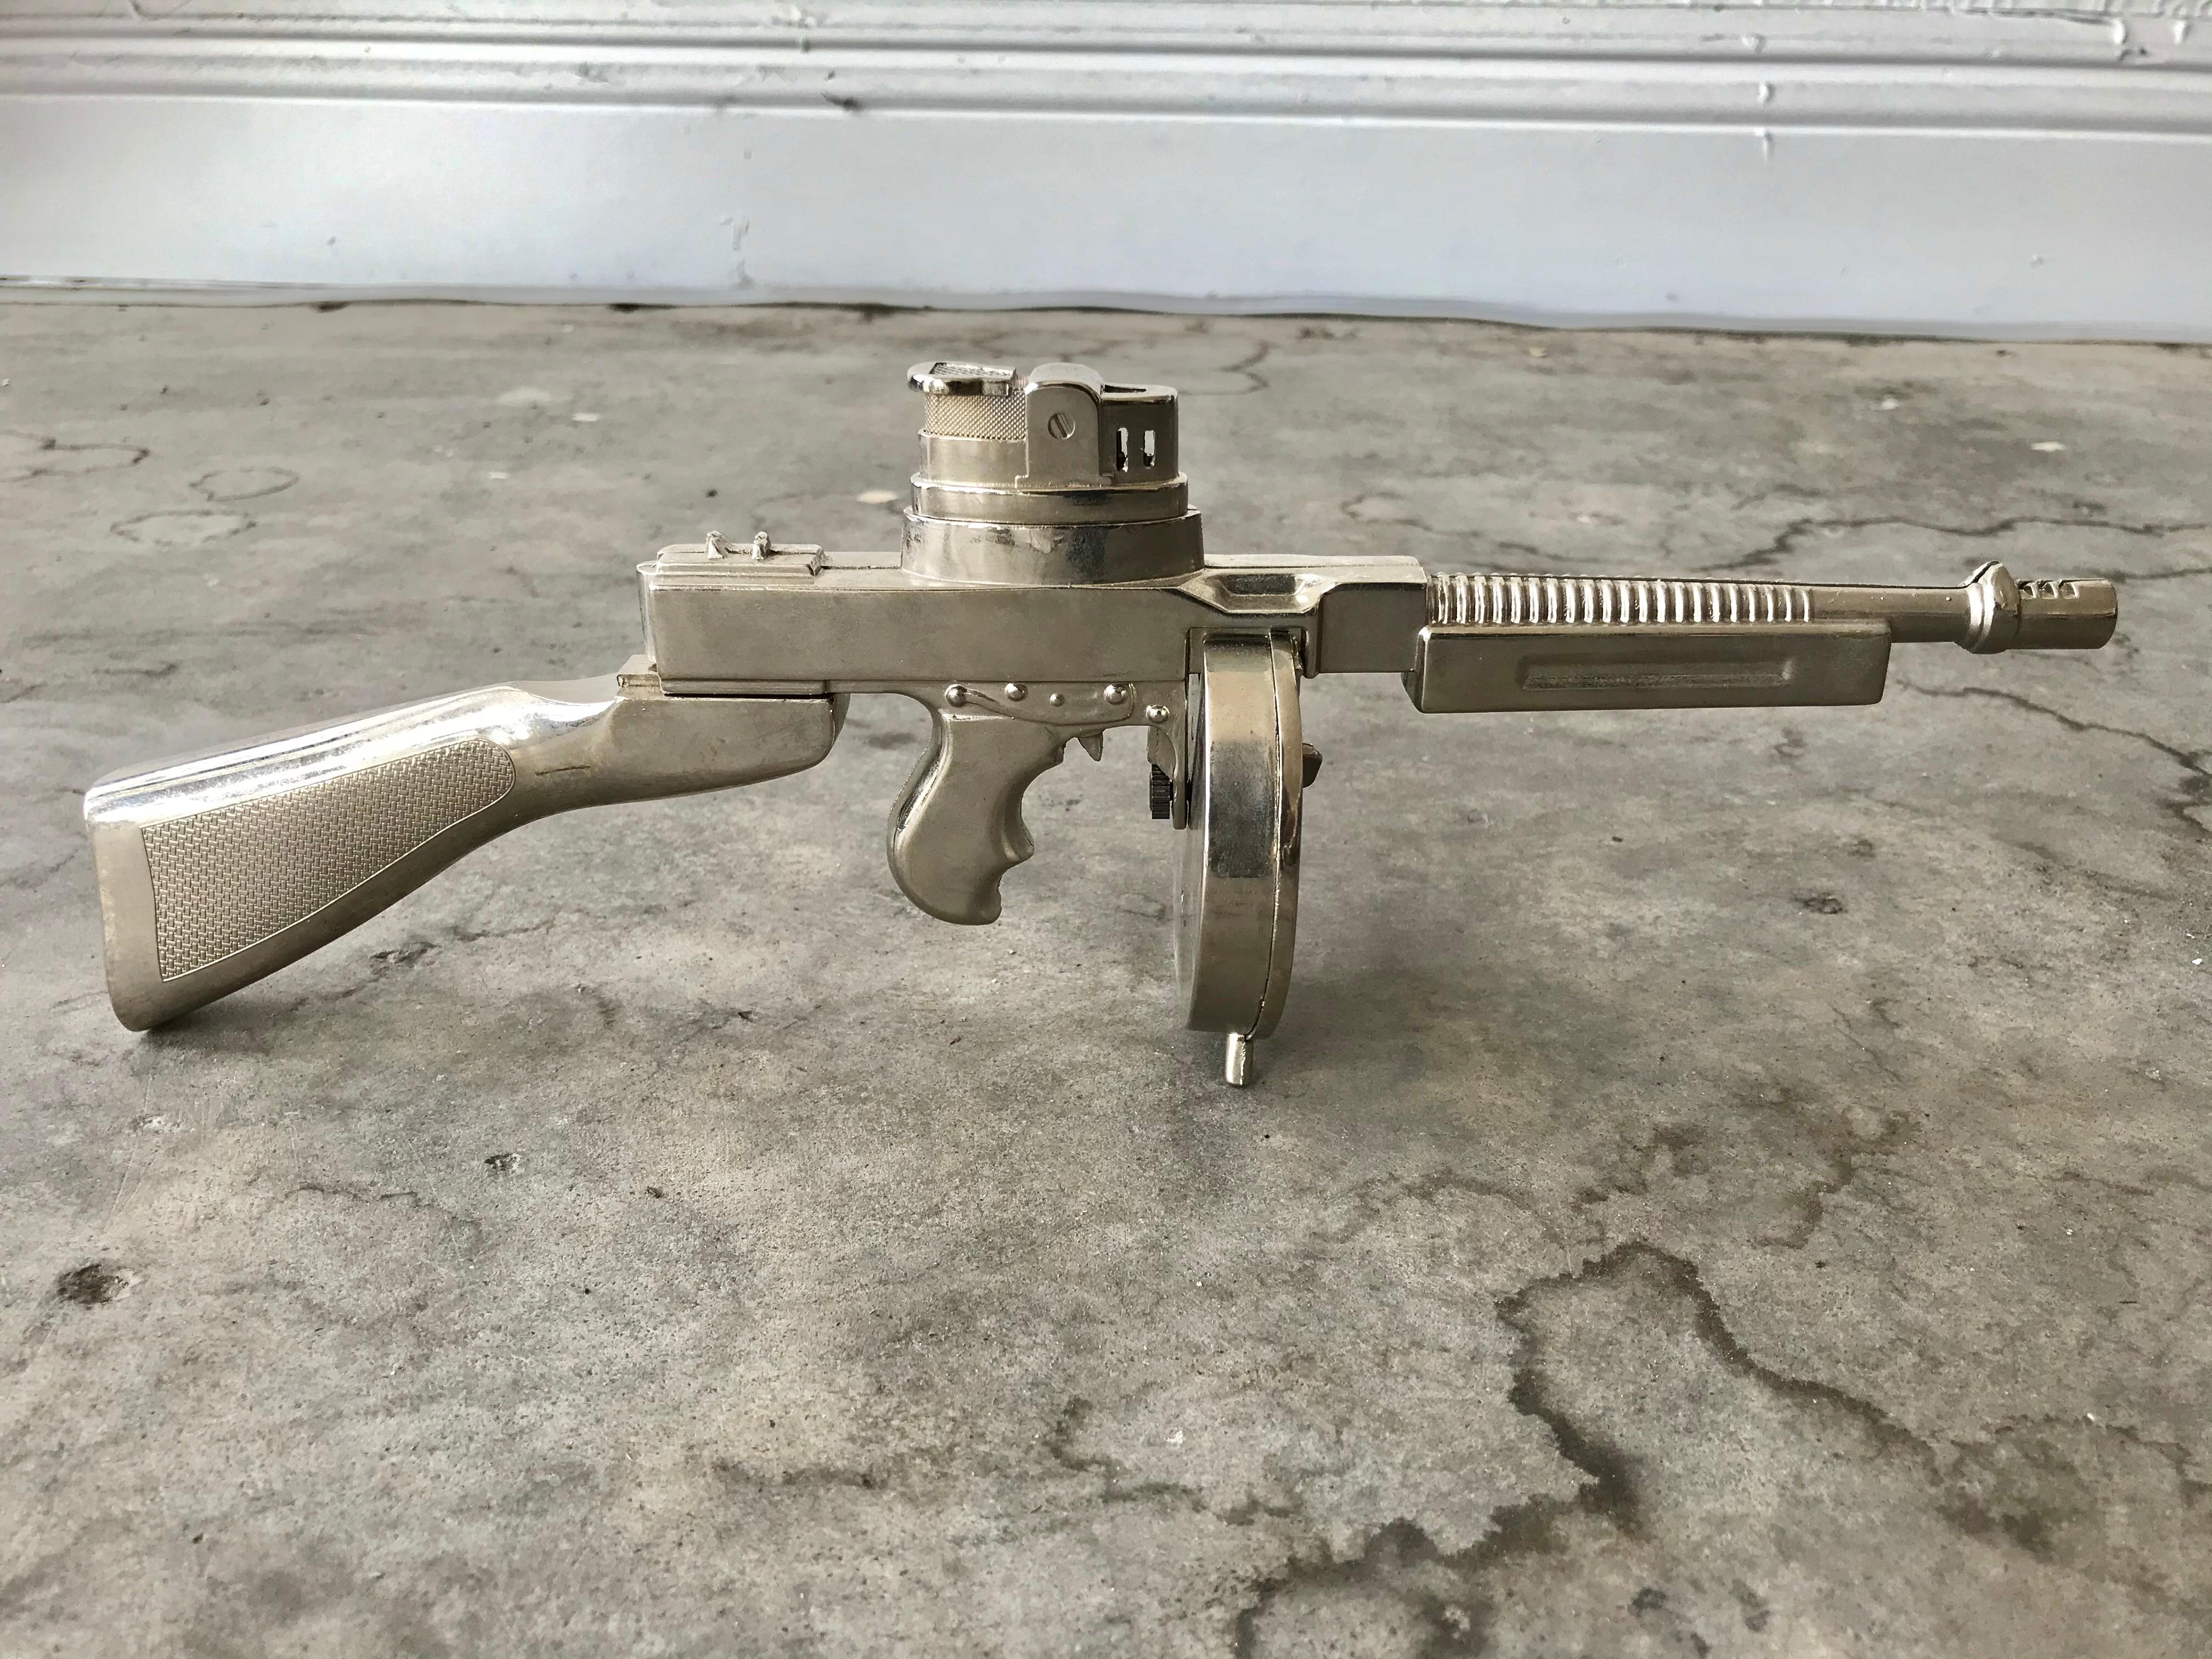 Cool vintage table lighter in the shape of a Thompson, single action revolver handgun. Made of metal and stands up on its own. Cool tobacco accessory and conversation piece.

 